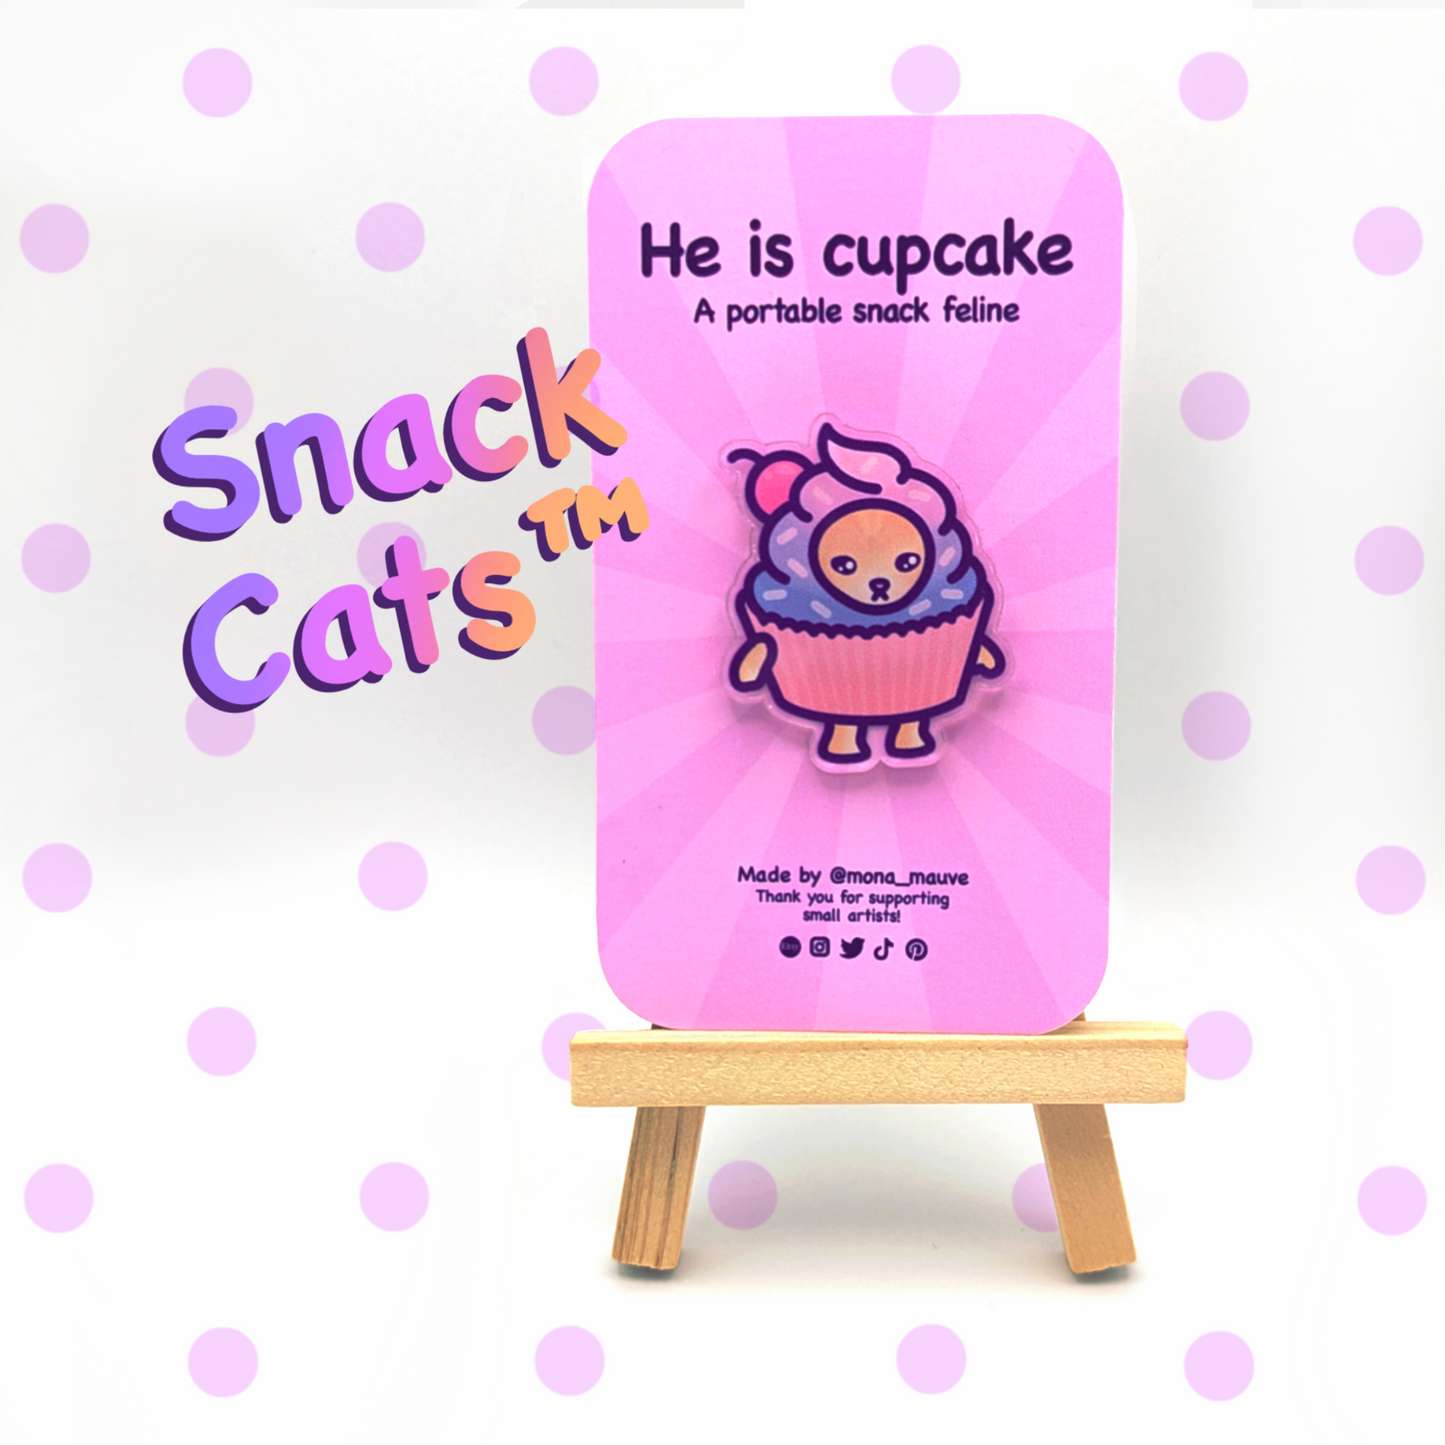 Cupcake Cat Pin | Snack Cats Collection | 40mm Acrylic Badge Butterfly Clutch | Cute Cat Meme | Funny, Sustainable & Eco-Friendly Gift